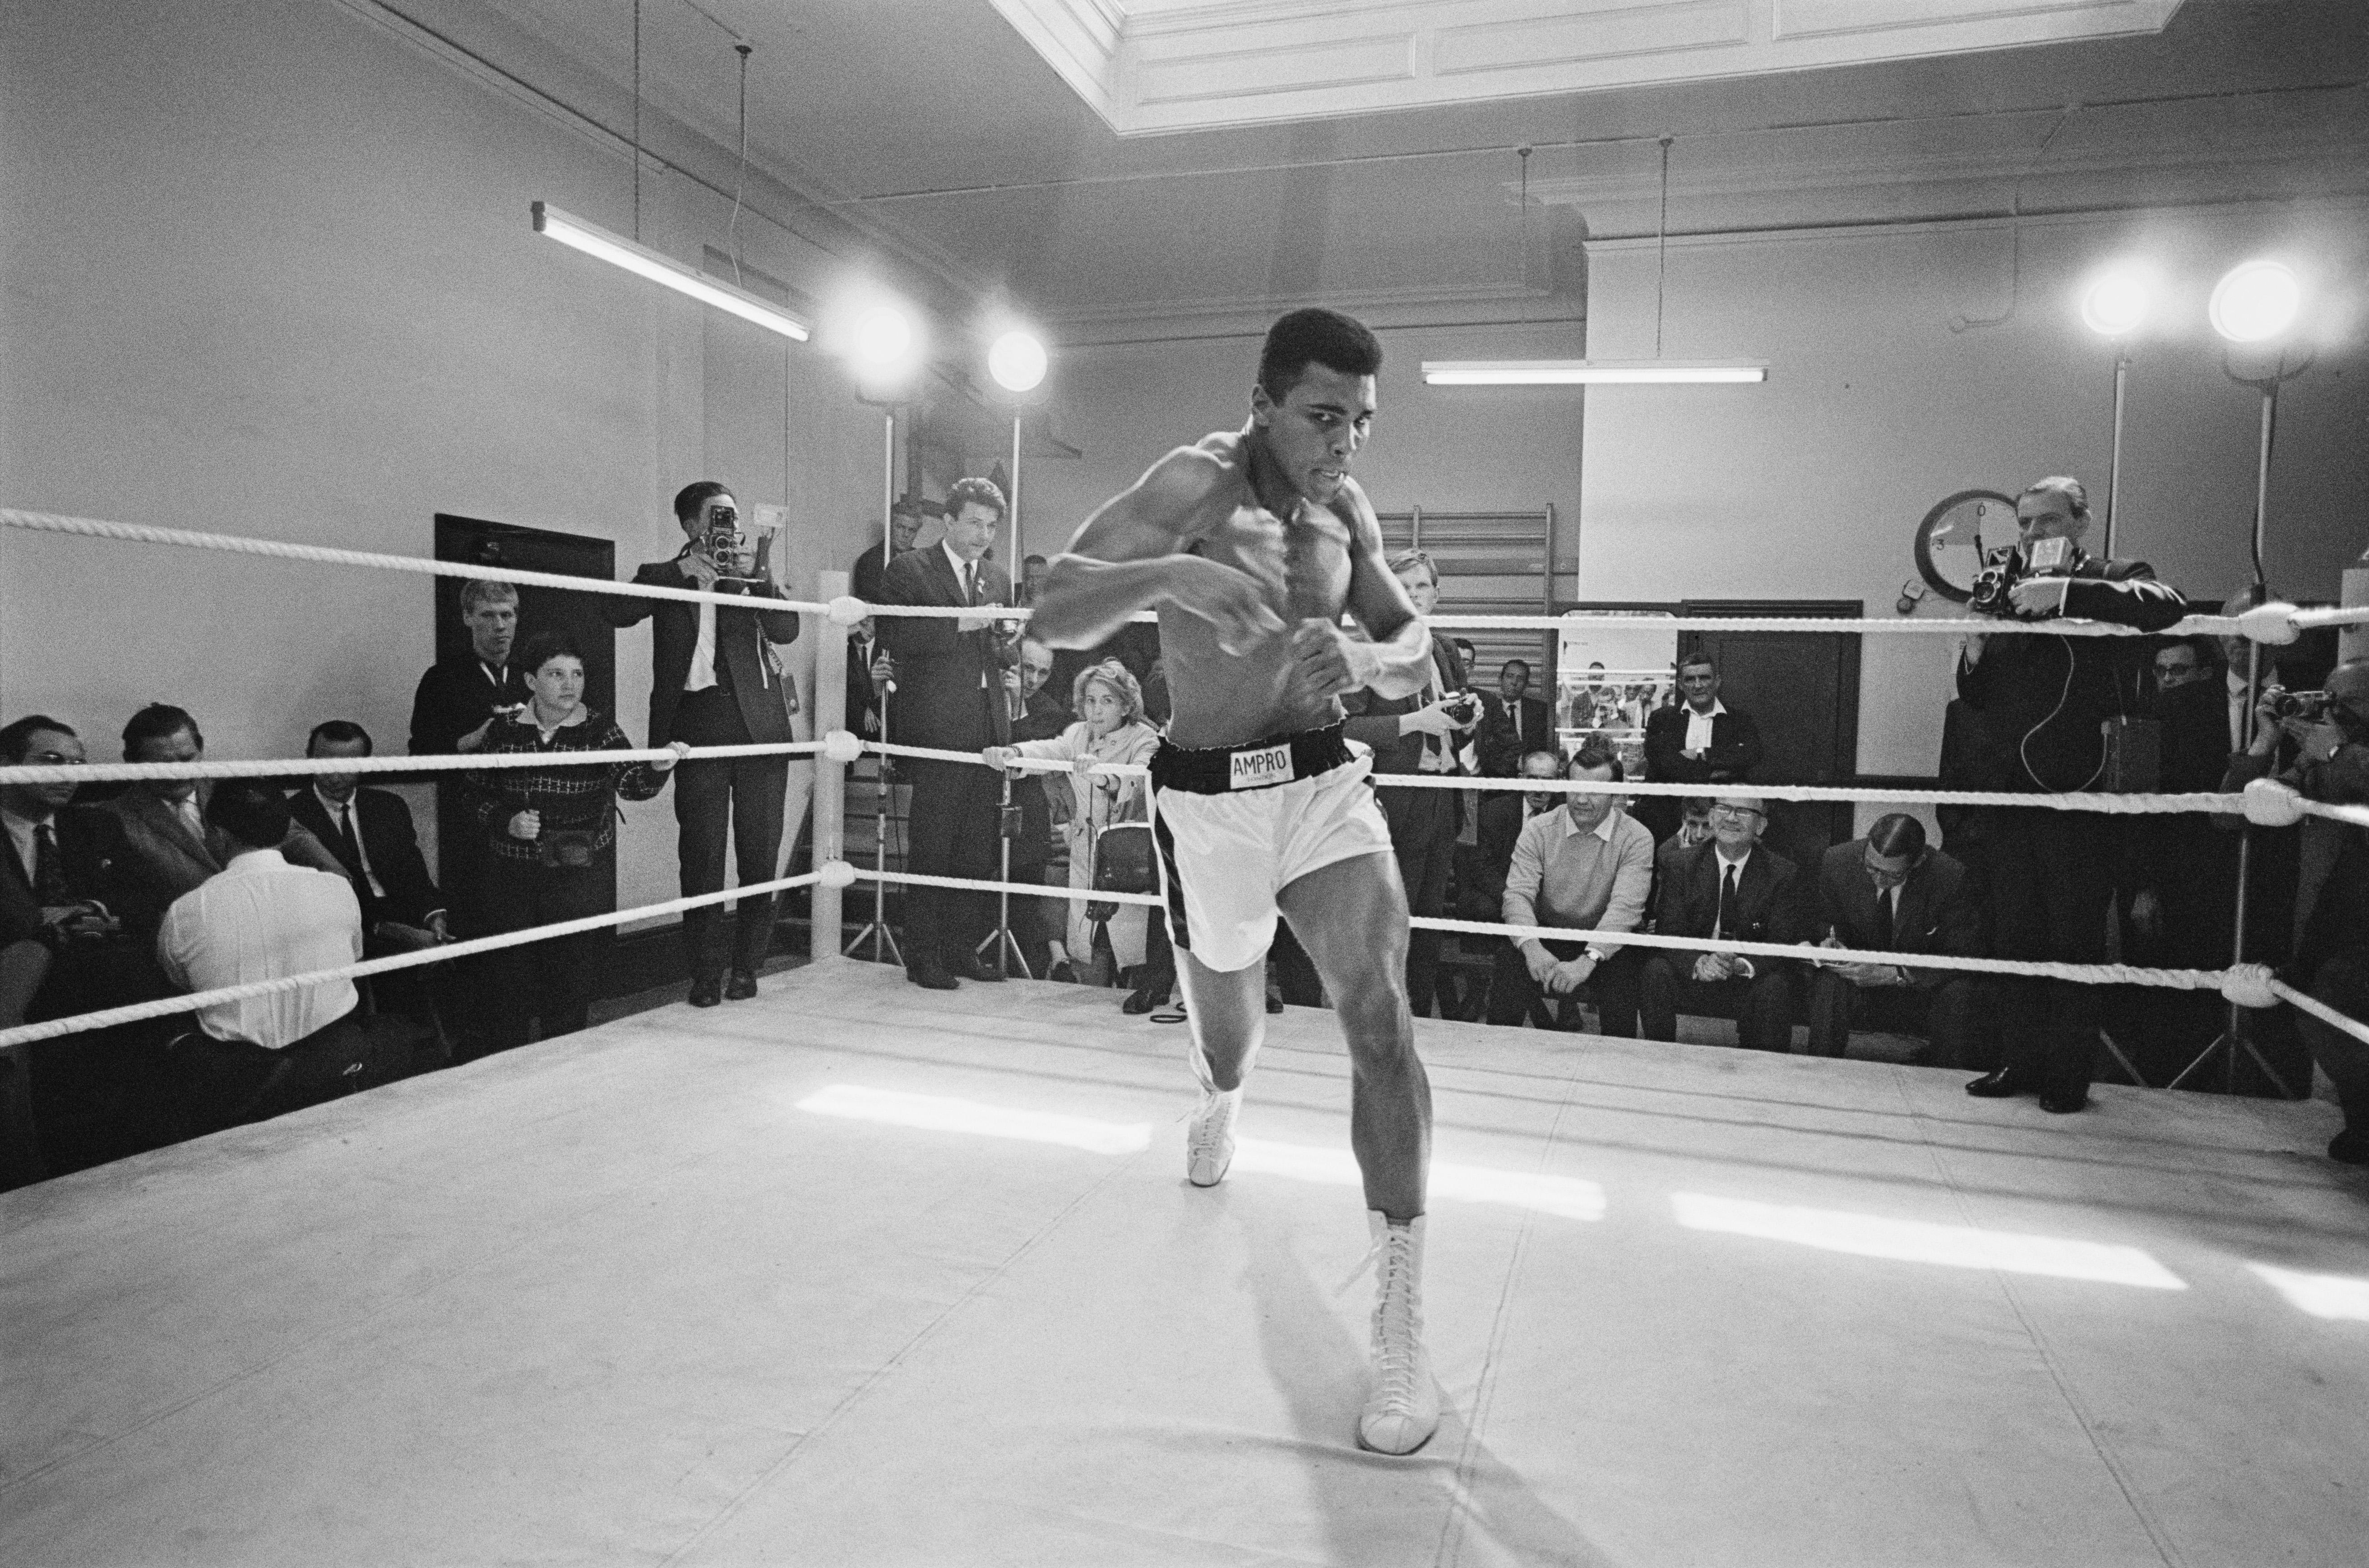 'Ali in Training' by R. McPhedran, Limited Edition Photograph Print, 20x24